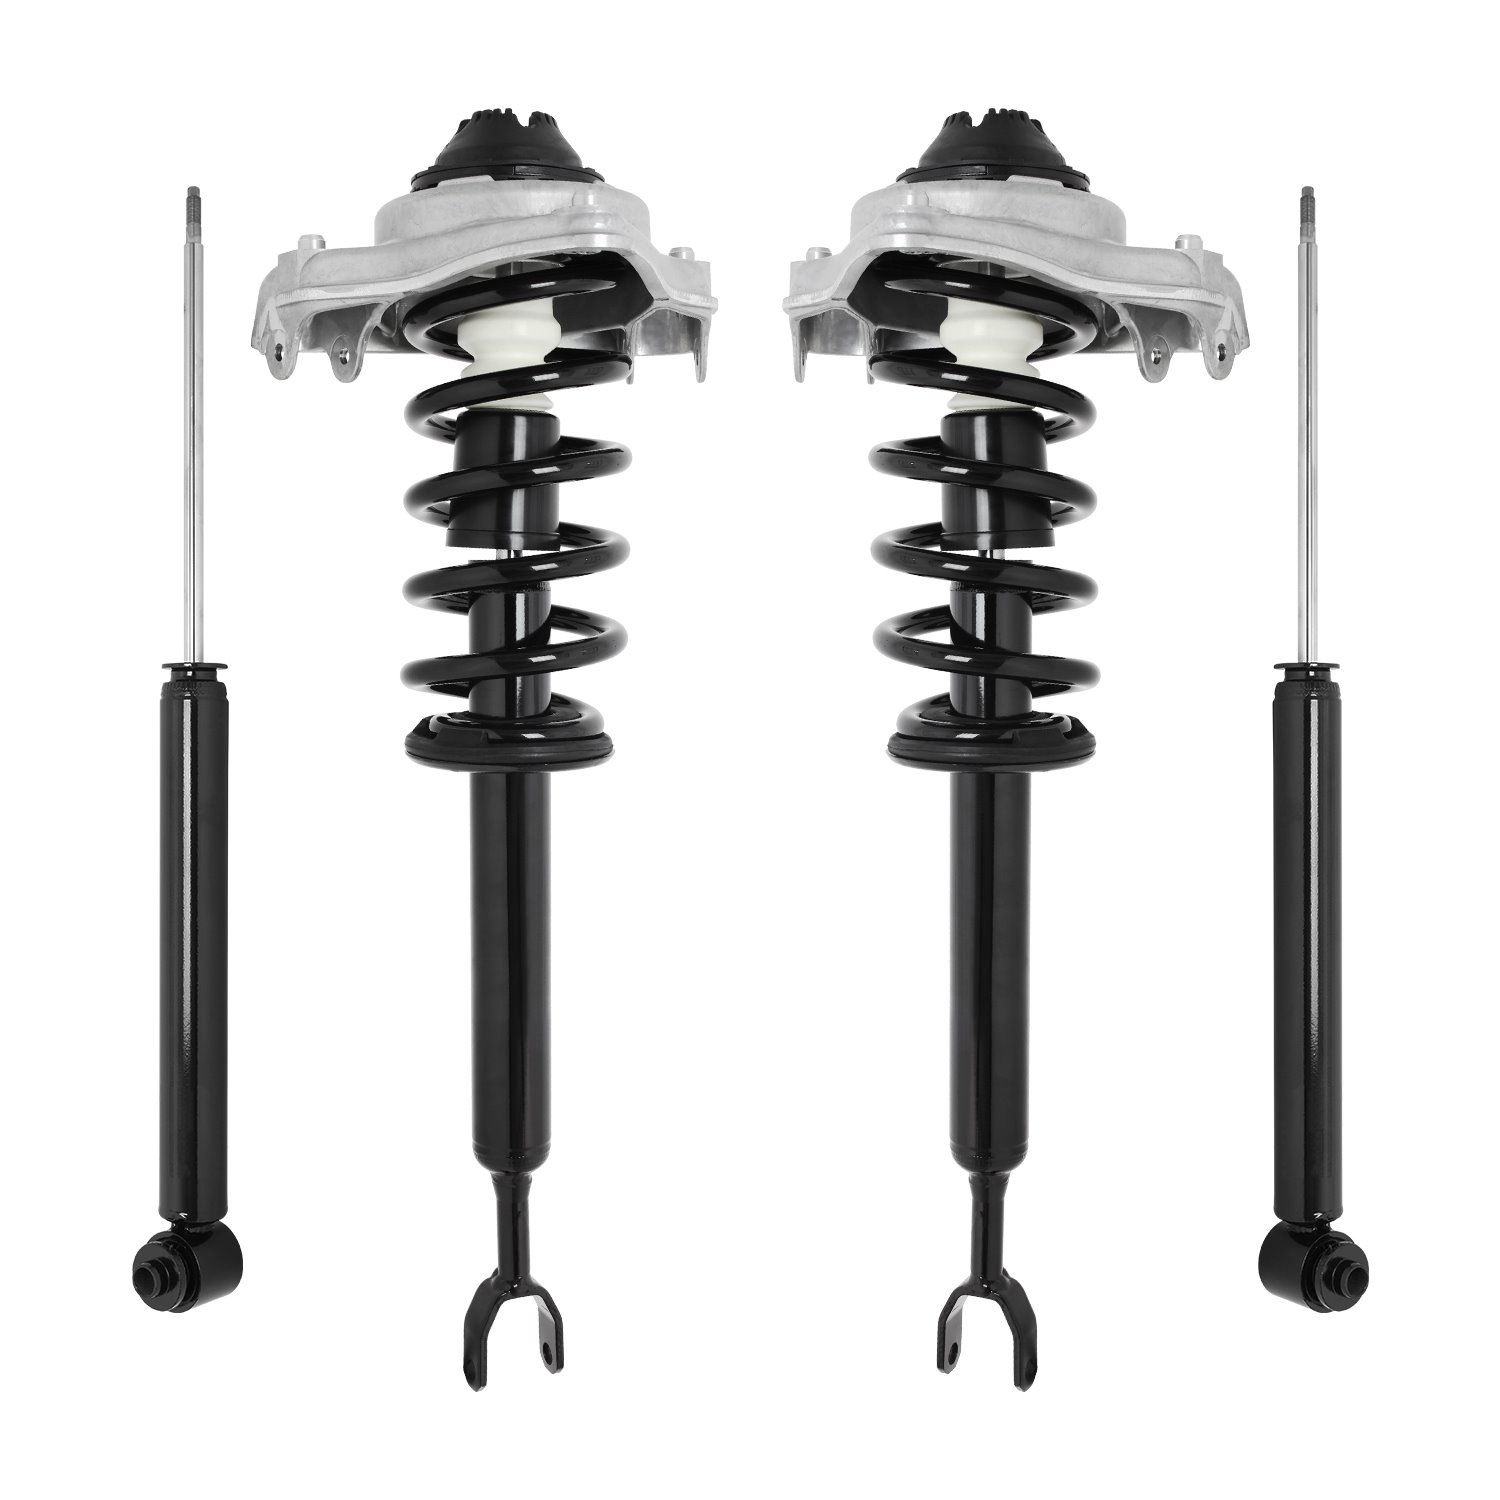 4-11230-257060-001 Front & Rear Suspension Strut & Coil Spring Assembly Fits Select Audi A6, Audi A6 Quattro